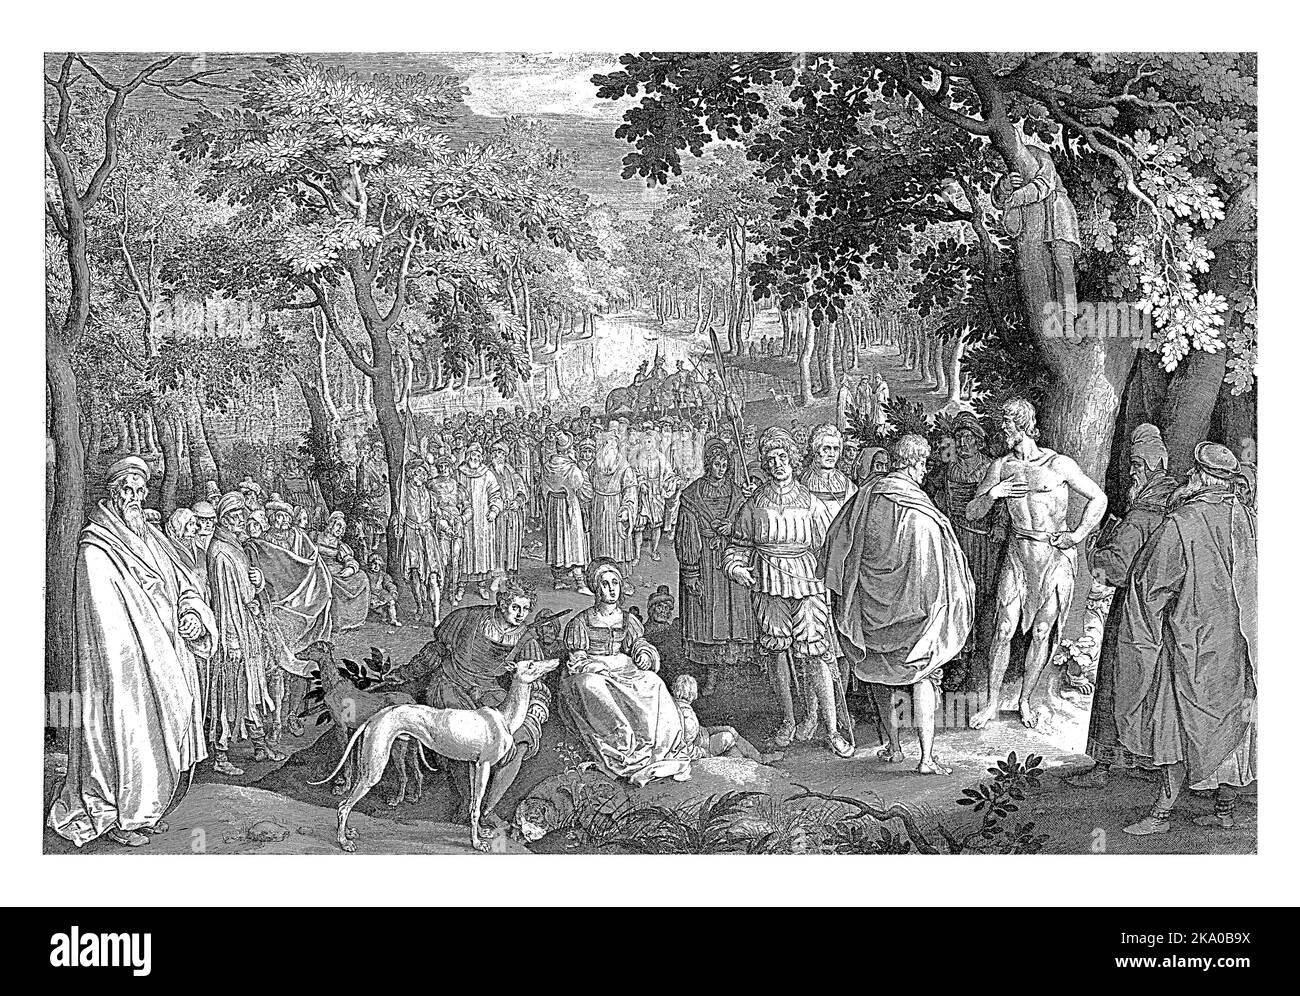 A forest landscape. In the foreground right is John the Baptist under a tree. He preaches to a large crowd. Stock Photo